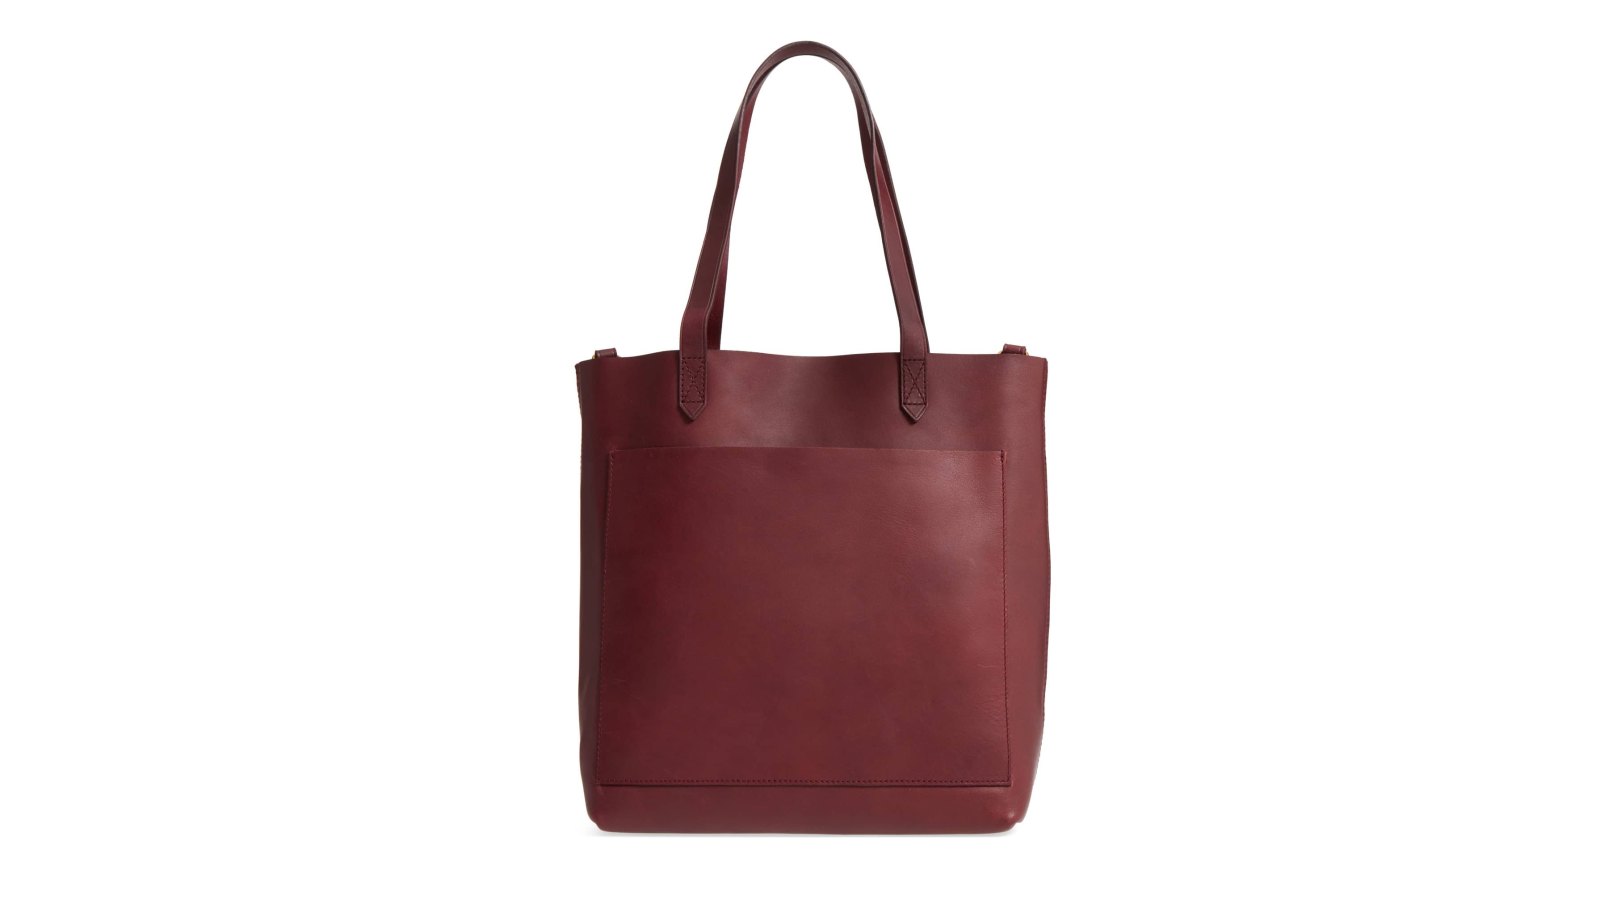 Honest Madewell Medium Transport Tote Review (Plus Size